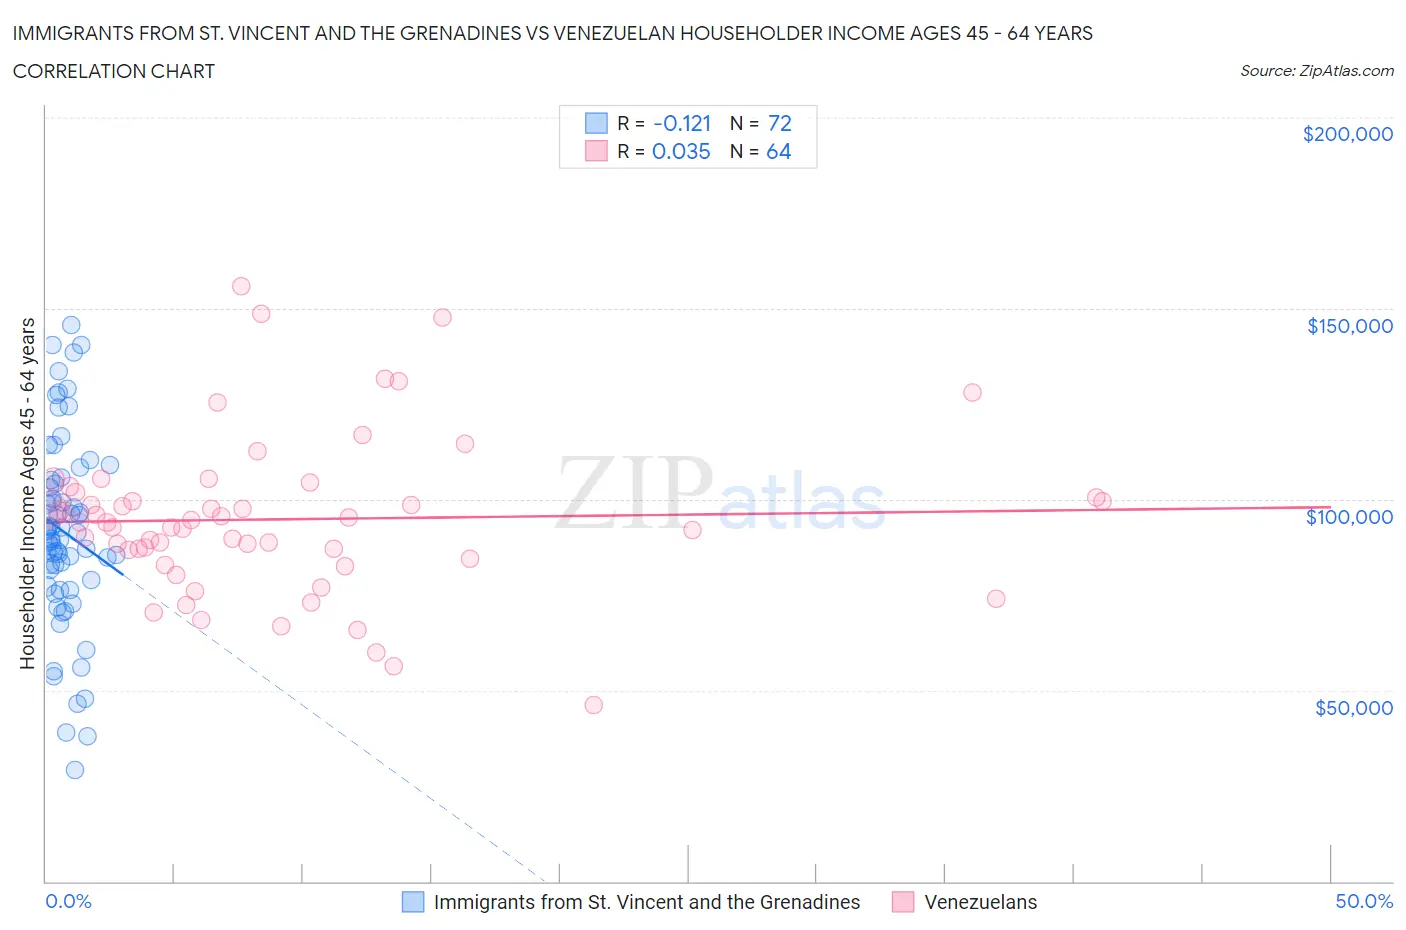 Immigrants from St. Vincent and the Grenadines vs Venezuelan Householder Income Ages 45 - 64 years